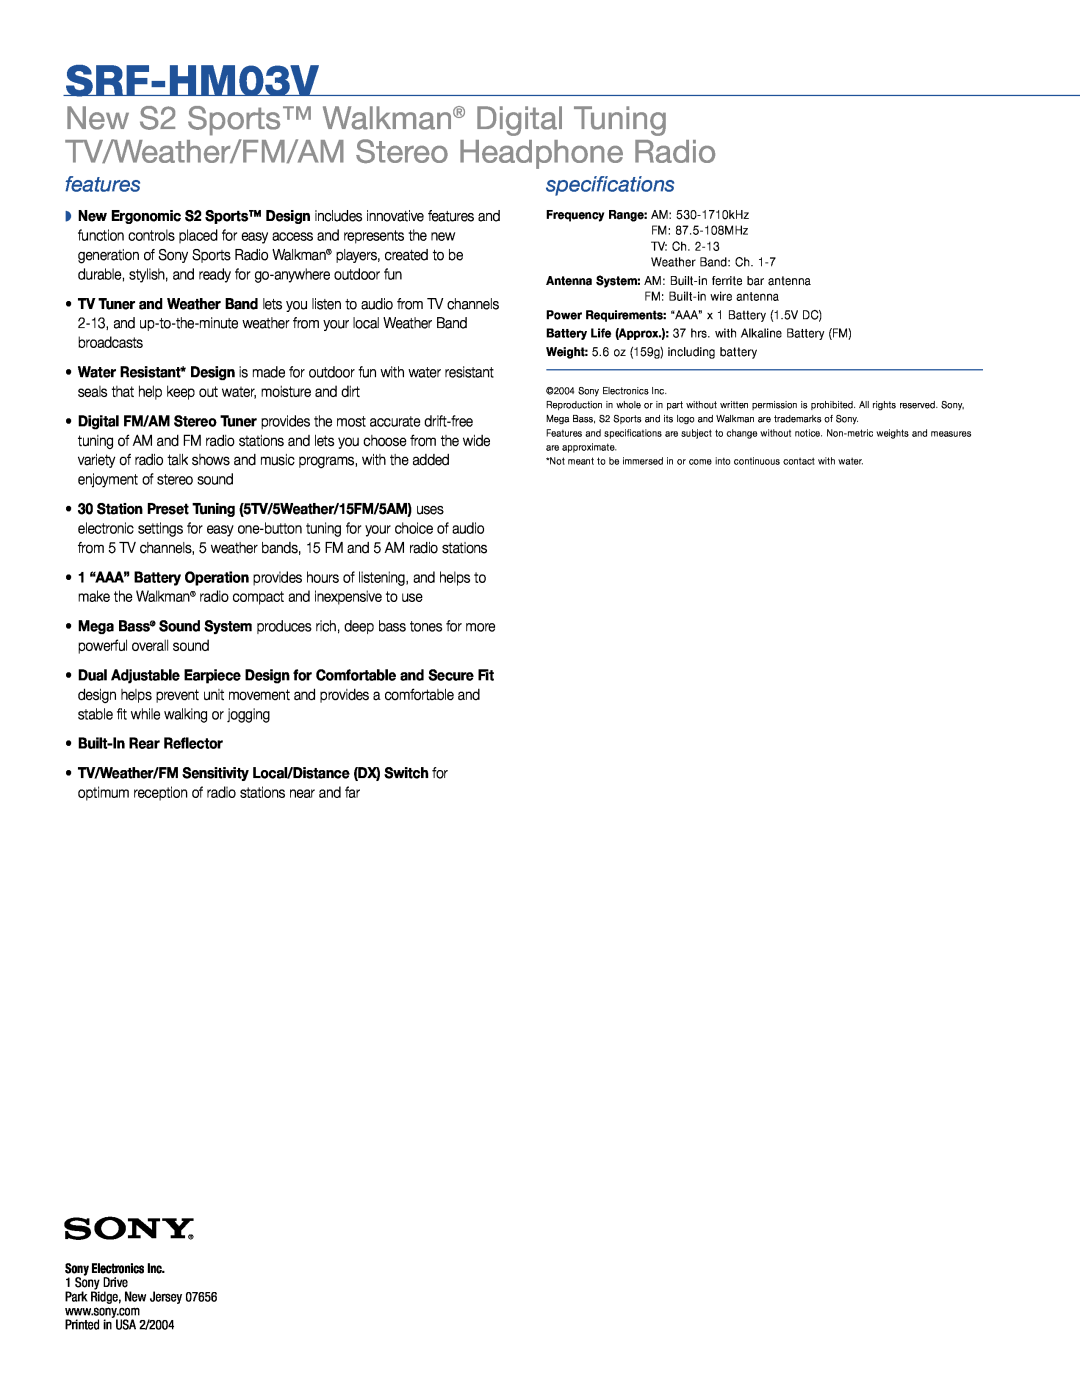 Sony SRF-HM03V manual features, specifications 